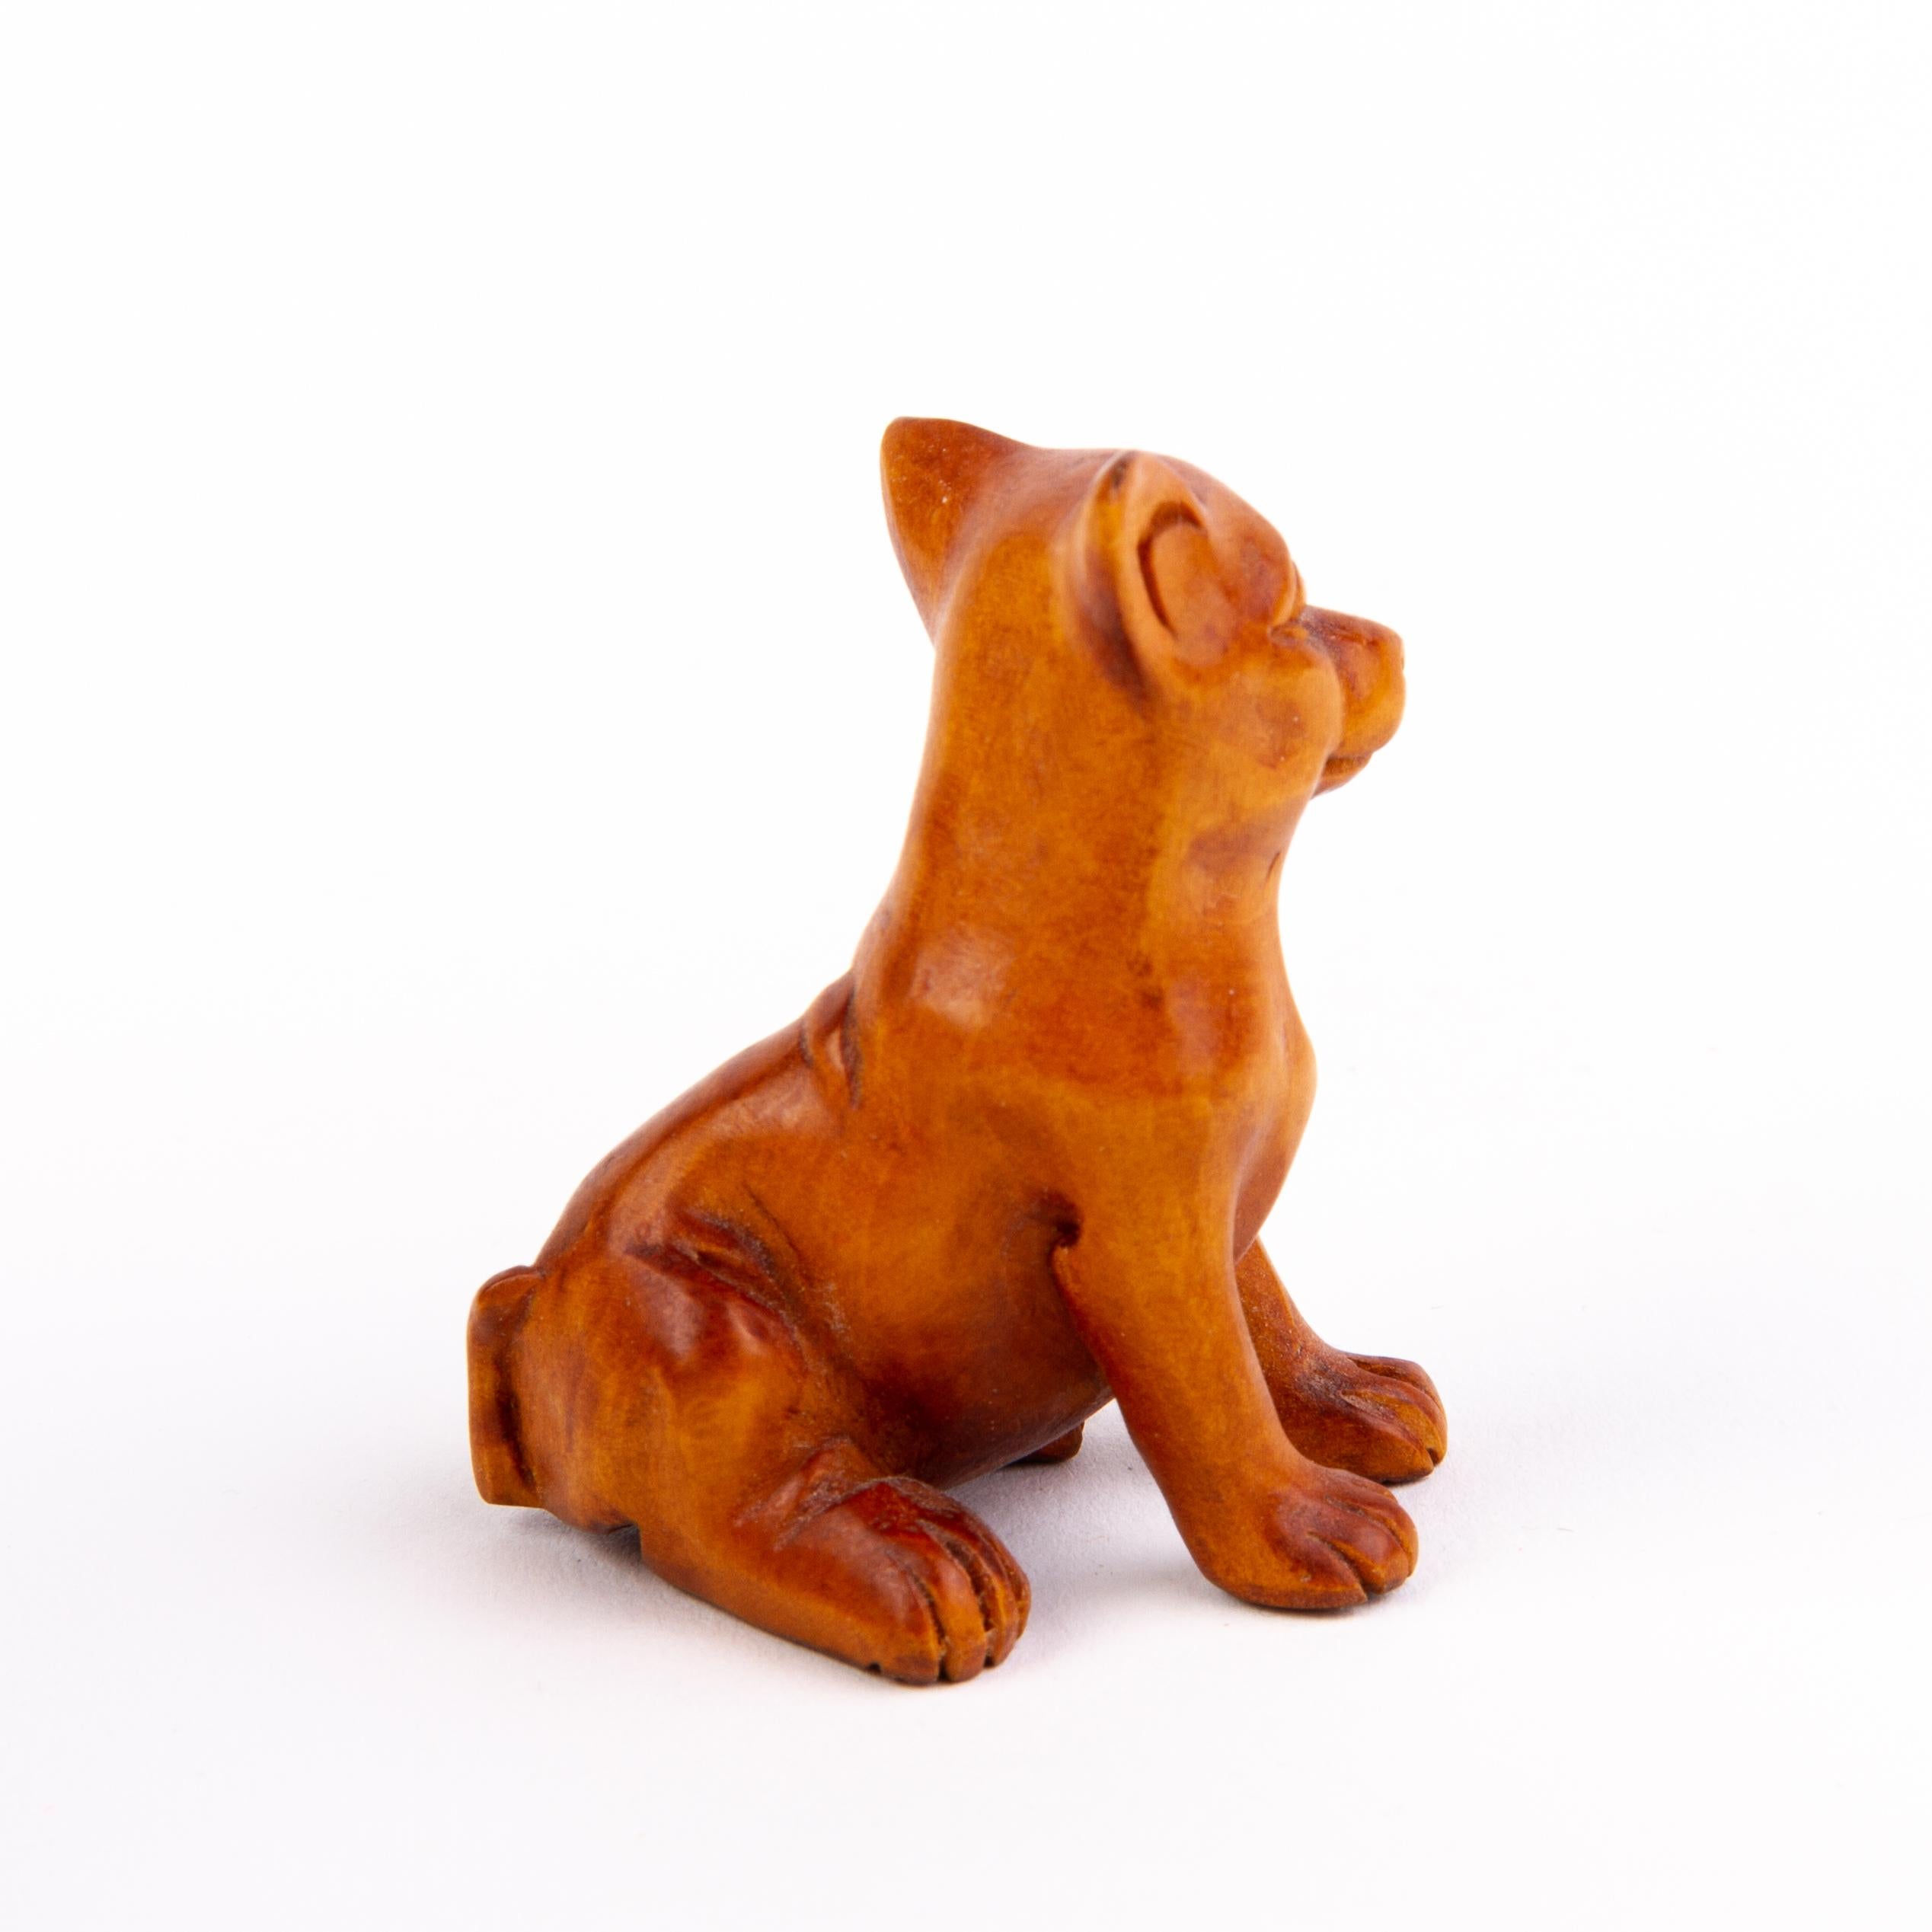 In good condition
From a private collection
Free international shipping
Signed Japanese Boxwood Netsuke Inro of Dog 